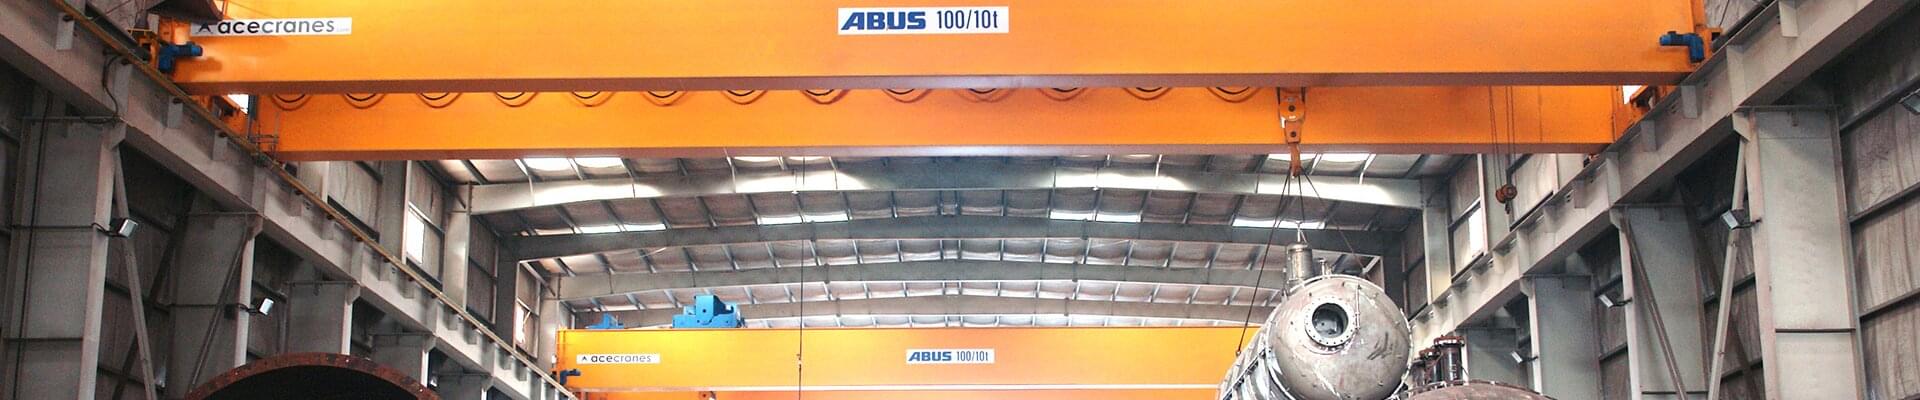 ABUS double girder overhead travelling crane with a load capacity of 100 t in a production facility of DESCON Engineering HFZC in the United Arab Emirates. 